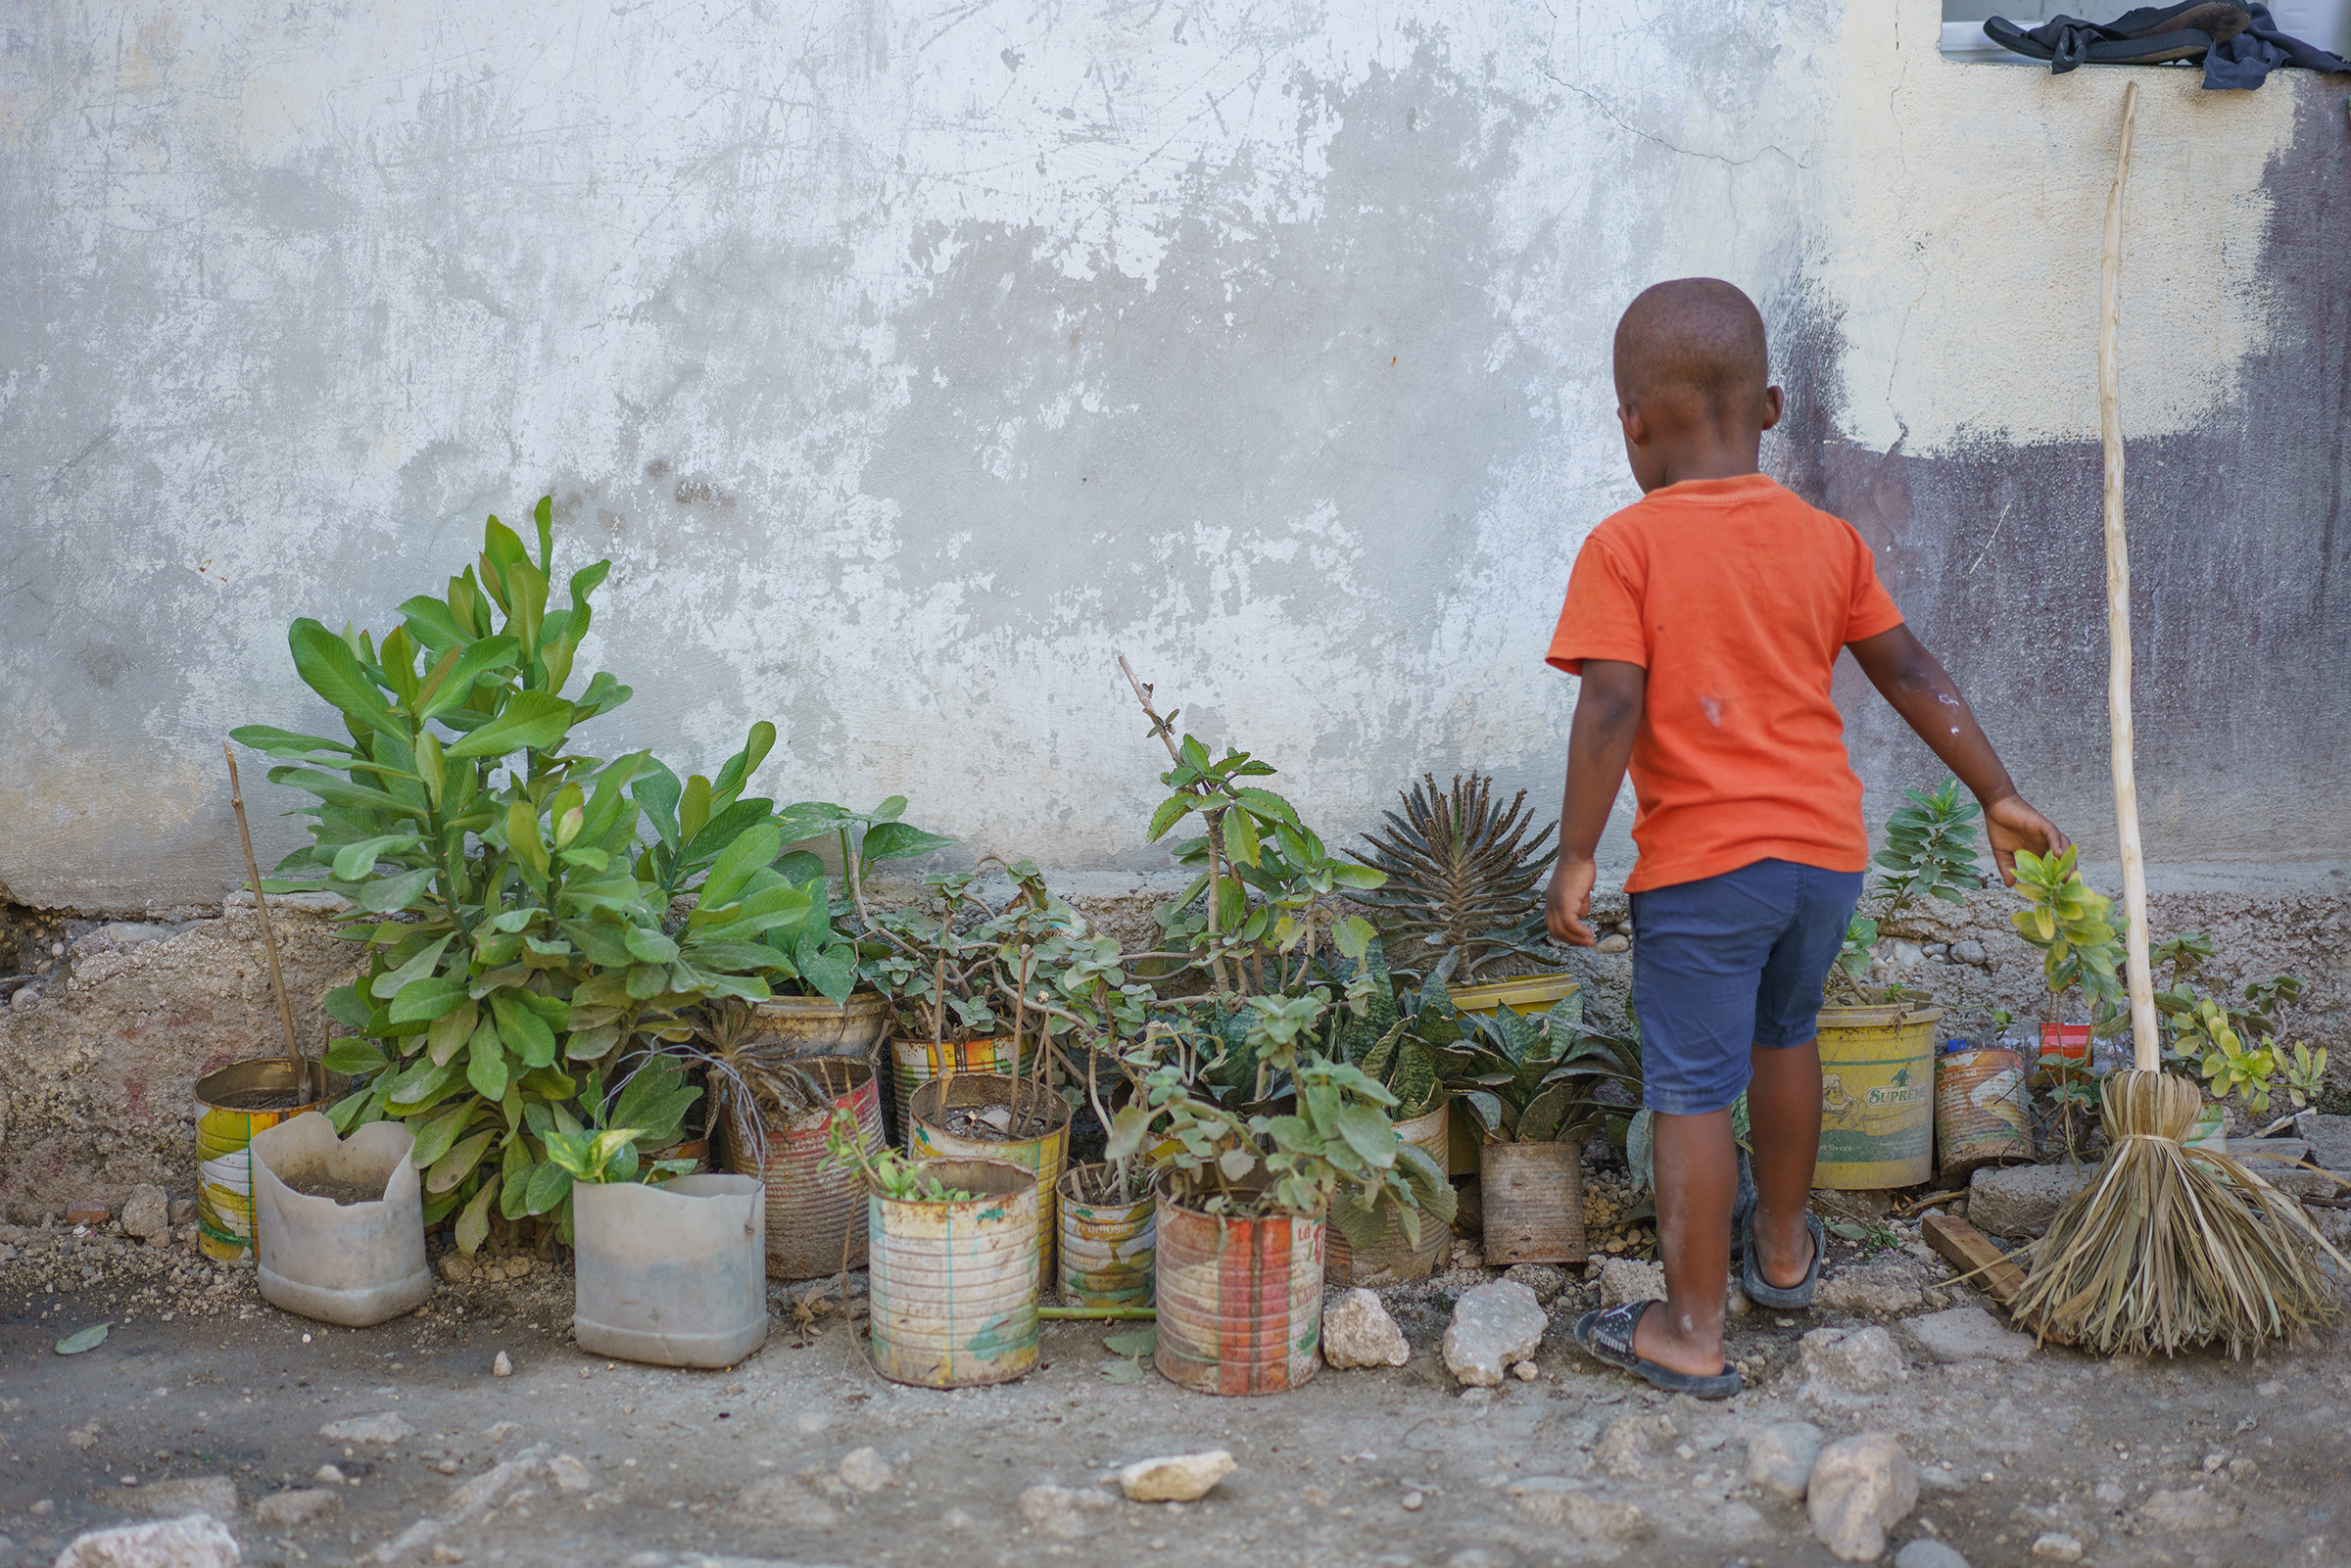 Prince Honey Joseph, 3, plays at his home in Port-au-Prince, Haiti on Thursday, December 30, 2021. His father, Mirard Joseph, who appeared in a viral photo being grabbed by a United States Border Patrol agent on horseback, was deported to Haiti where he hadn’t lived since 2017.